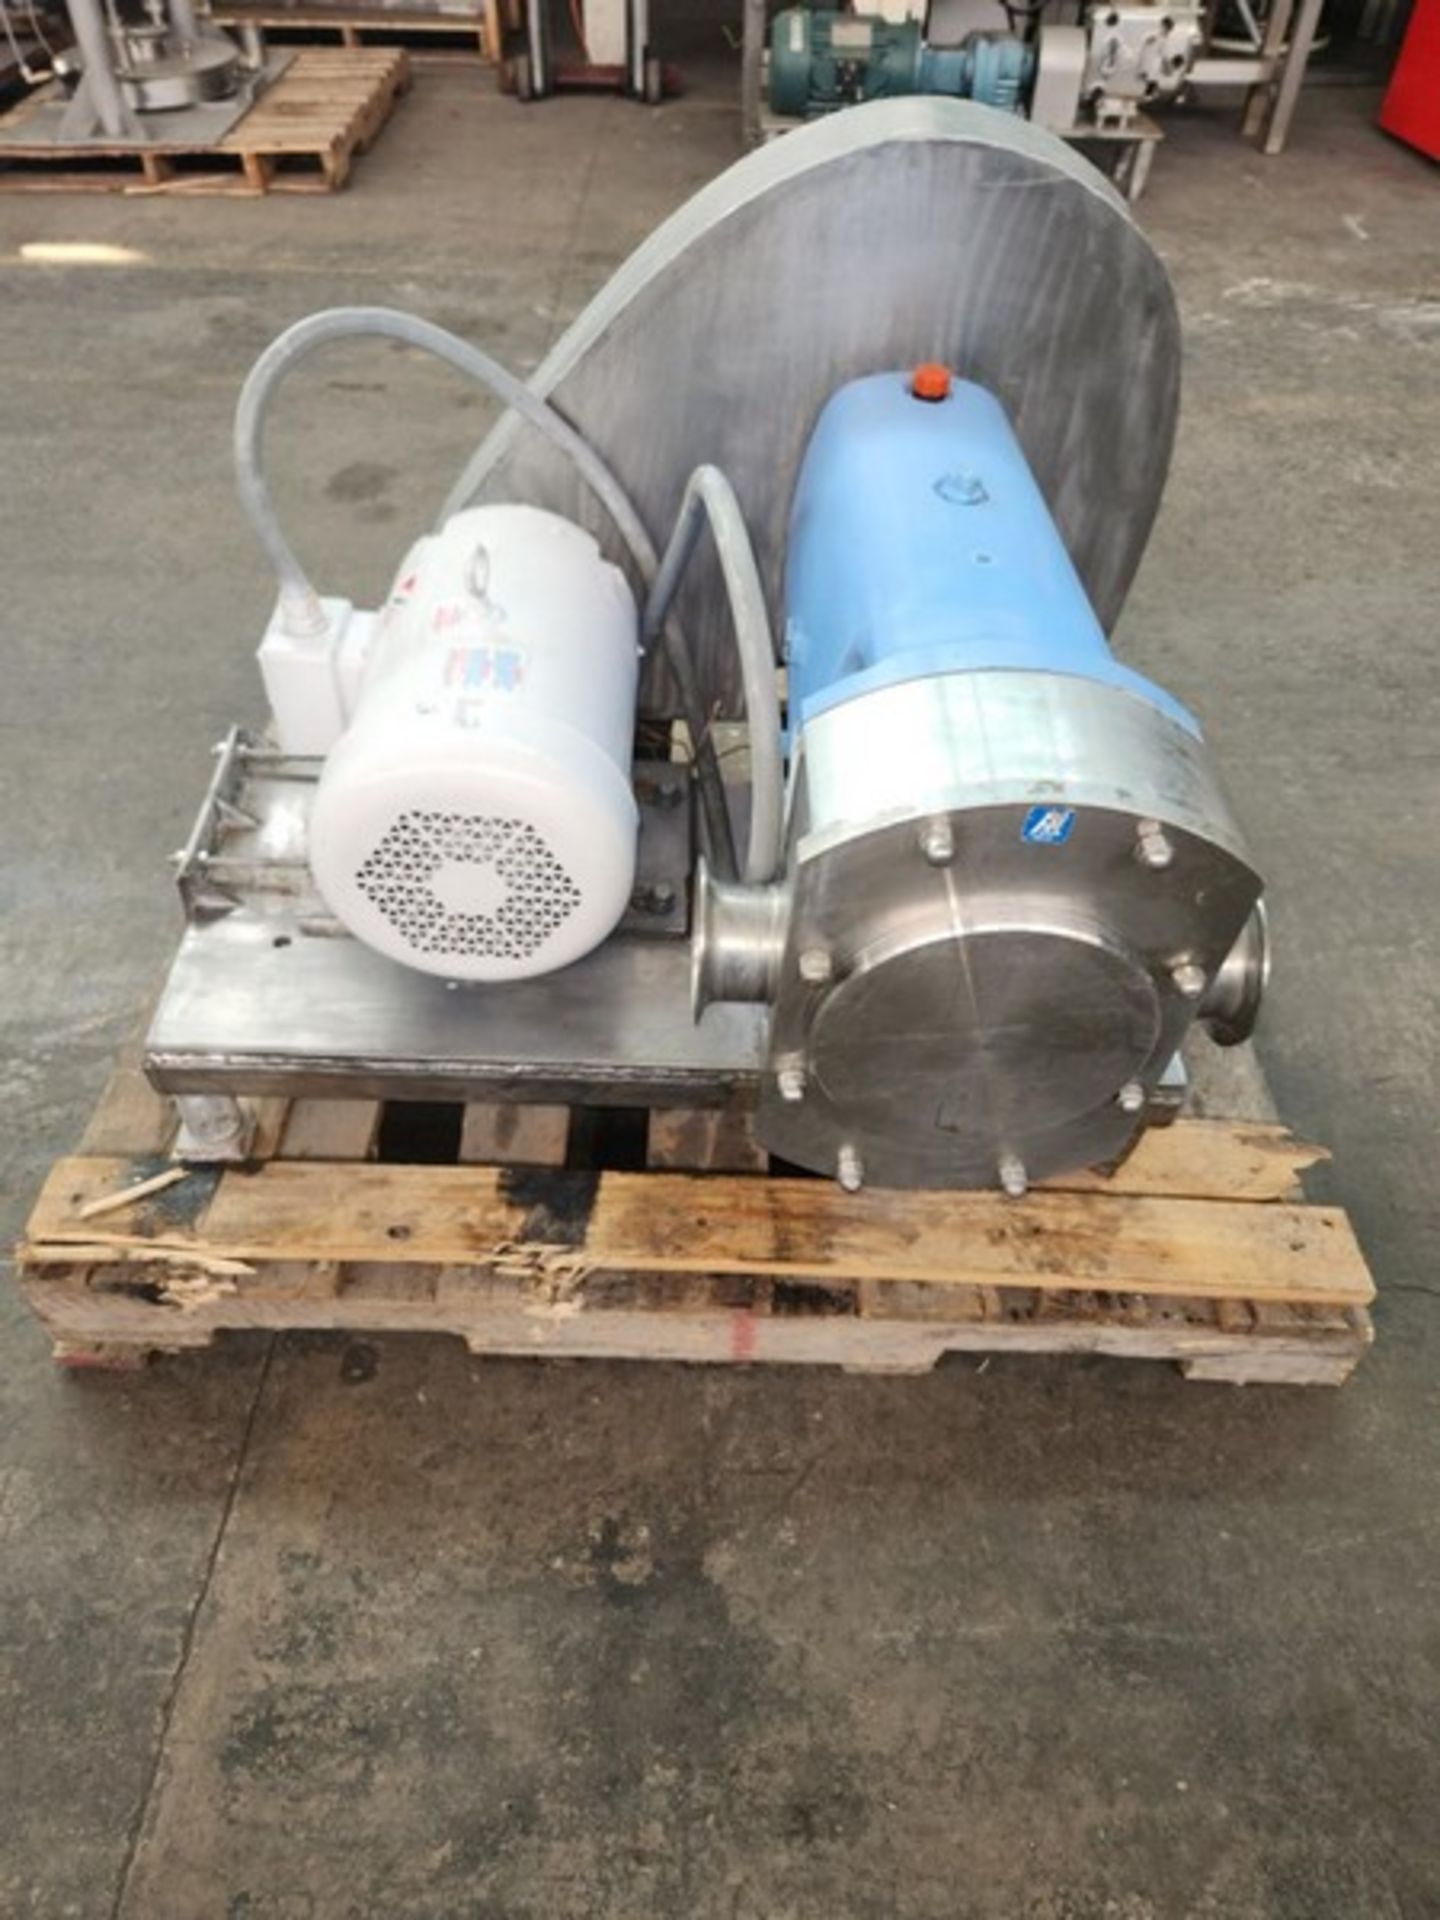 G H (Alfa Laval) 7.5 hp 4" S/S Sanitary Positive Displacement Pump, Model 822, S/N 95-8-50174 with - Image 14 of 15